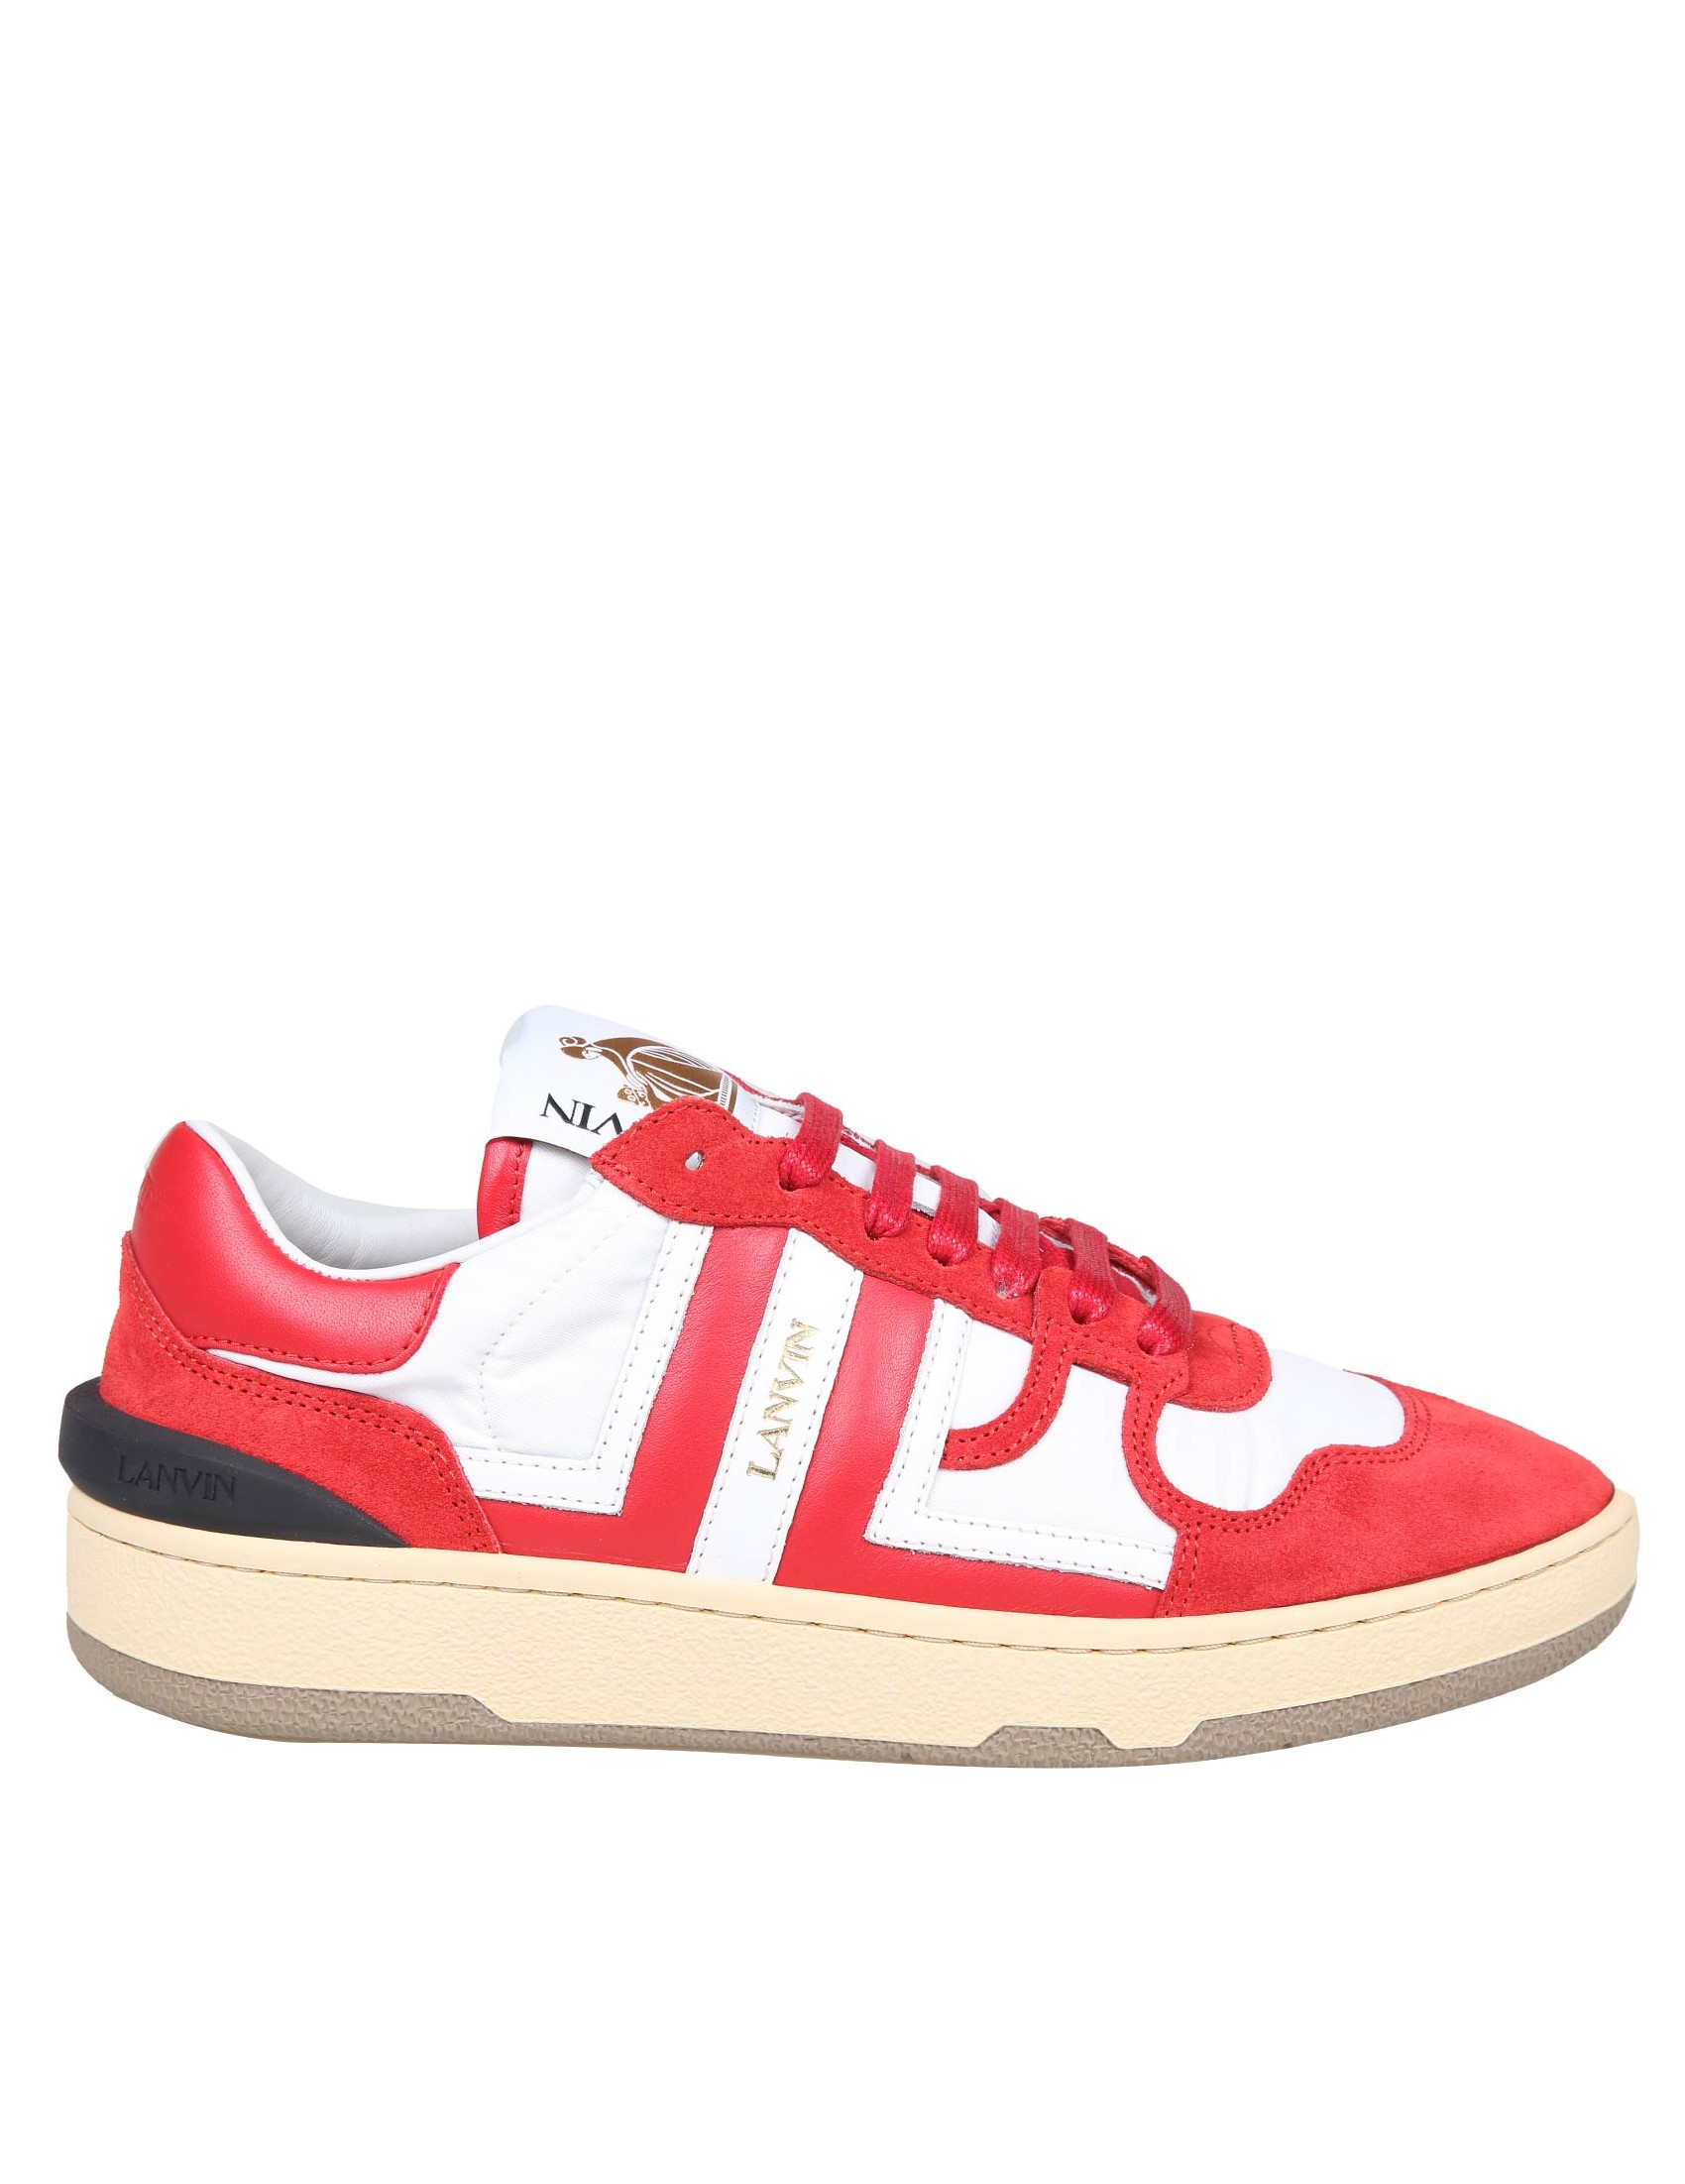 LANVIN CLAY LOW TOP SNEAKERS IN LEATHER AND NYLON COLOR WHITE/RED